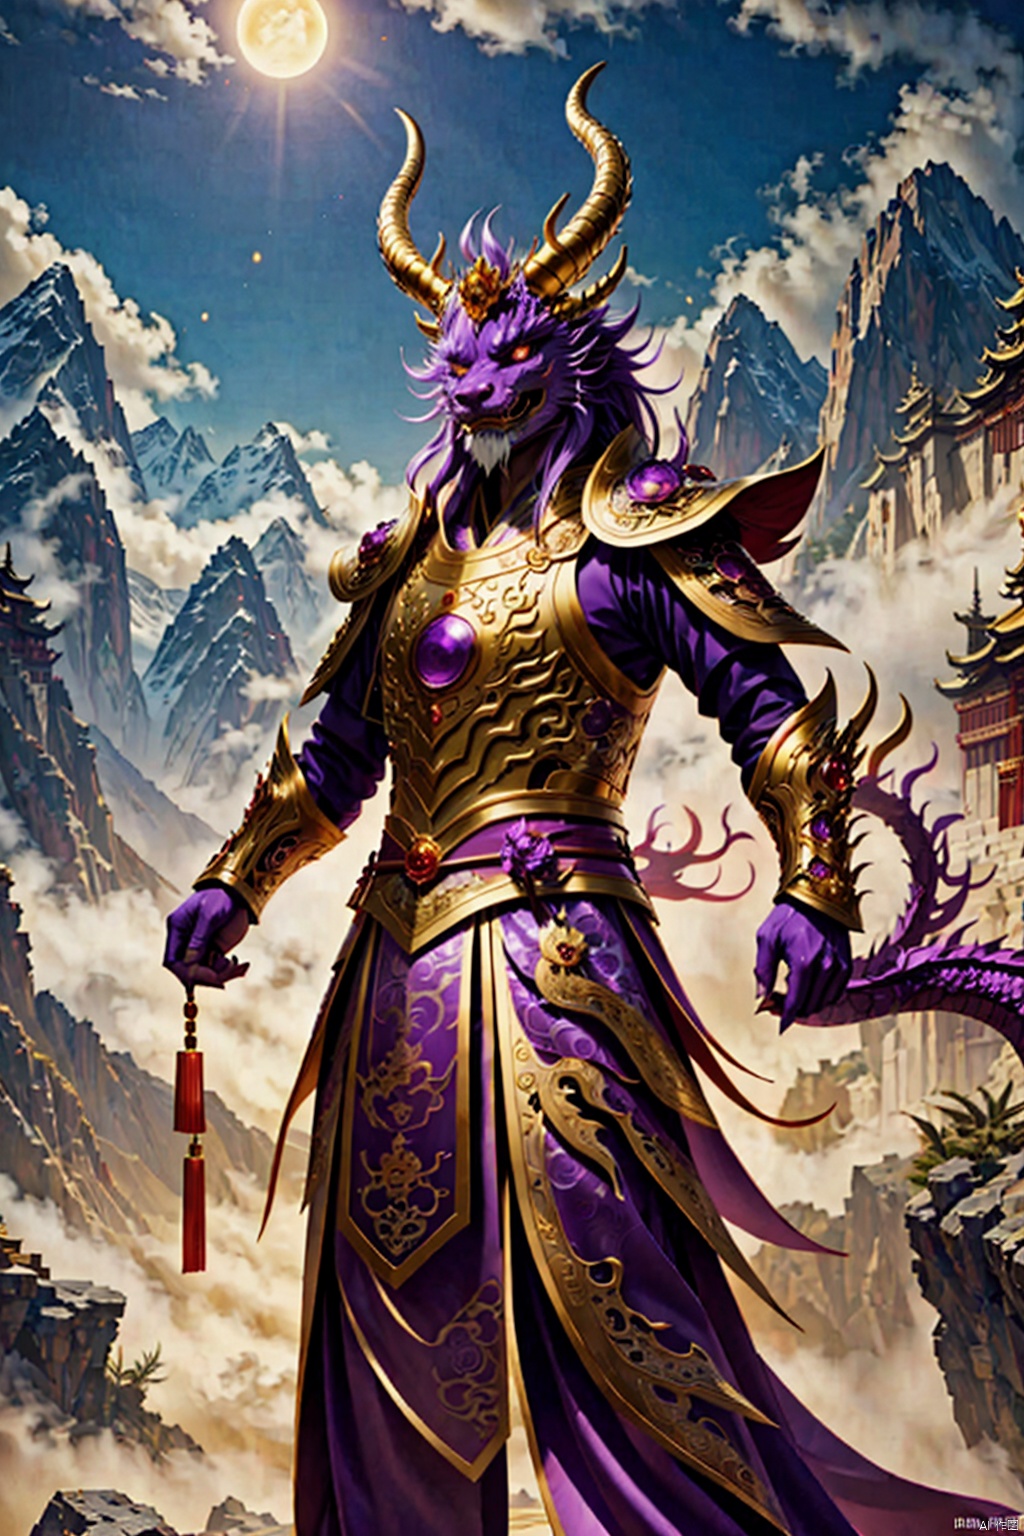  A fantasy style image of the Chinese Dragon King, he has purple eyes that release a dark light , golden antlers and armor glittering, behind him are traditional Chinese buildings and fantasy mountains,<lora:660447313082219790:1.0>,<lora:660447313082219790:1.0>,<lora:660447313082219790:1.0>